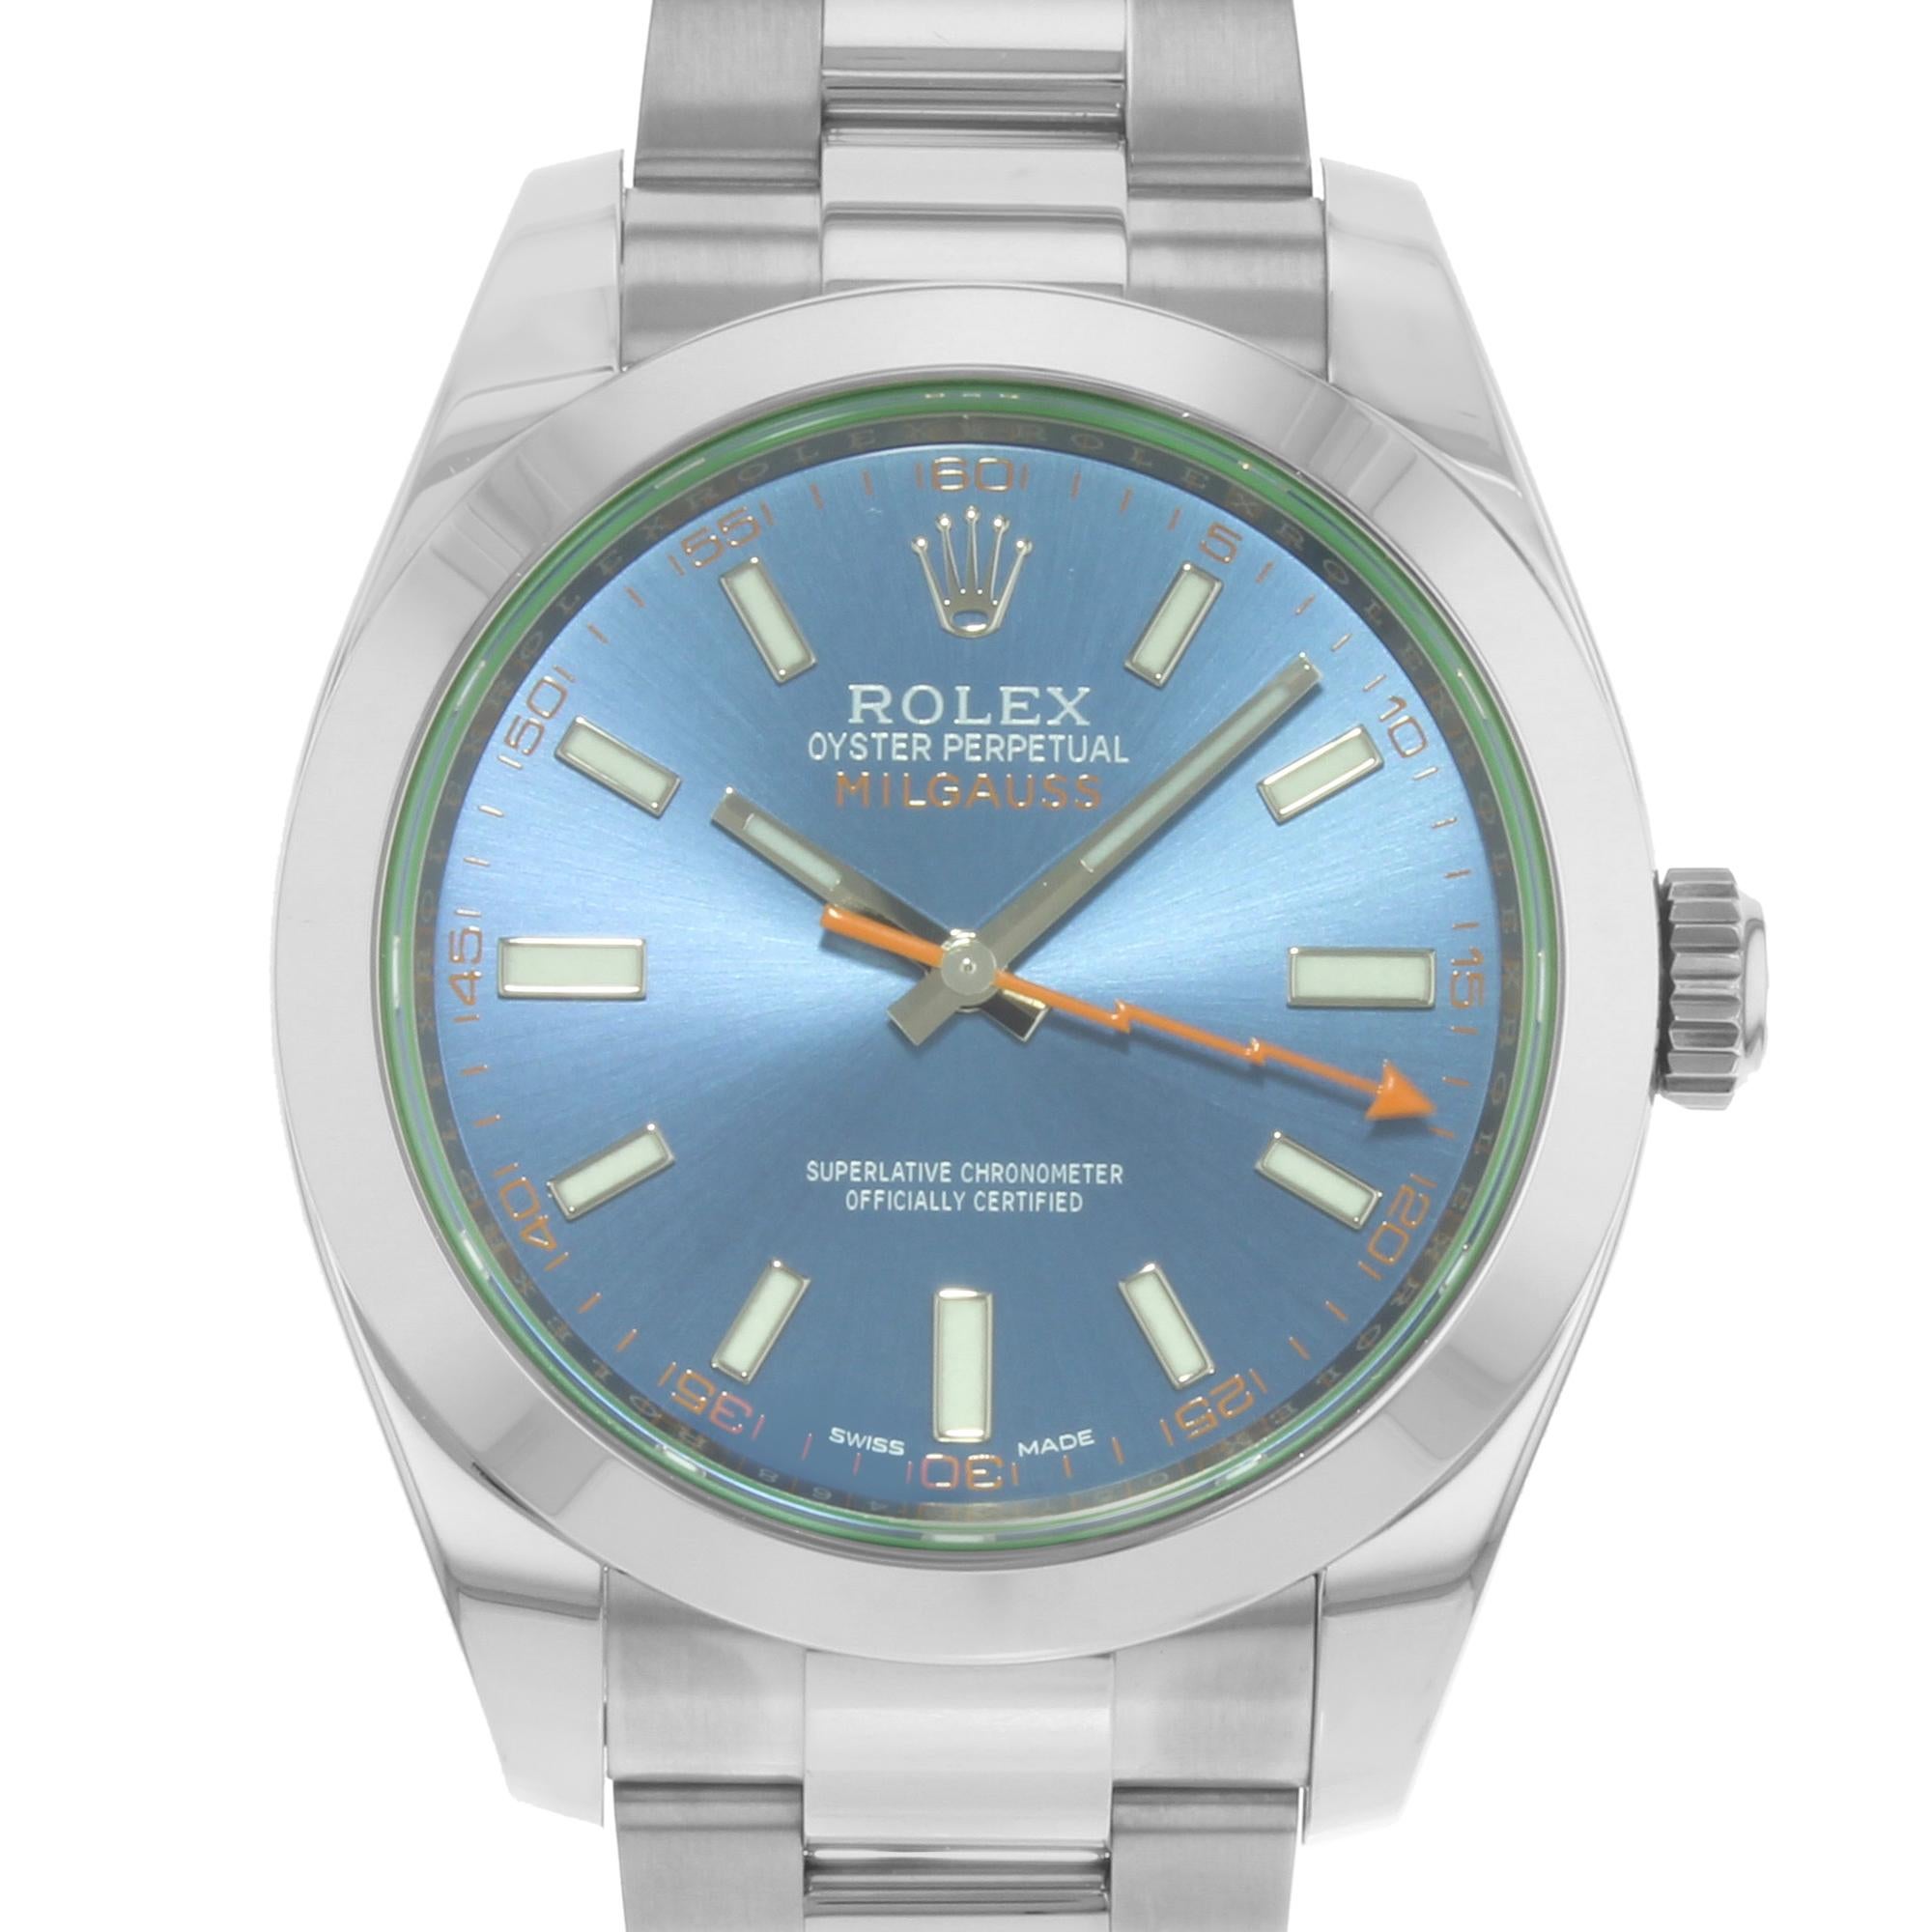 2023 card. Unworn. Original box and papers. 5-year Rolex warranty.

* Free shipping available across the nation
* 5-year warranty protection
* 14-day returns, complete with a full refund. Within this timeframe, customers can authenticate the watch